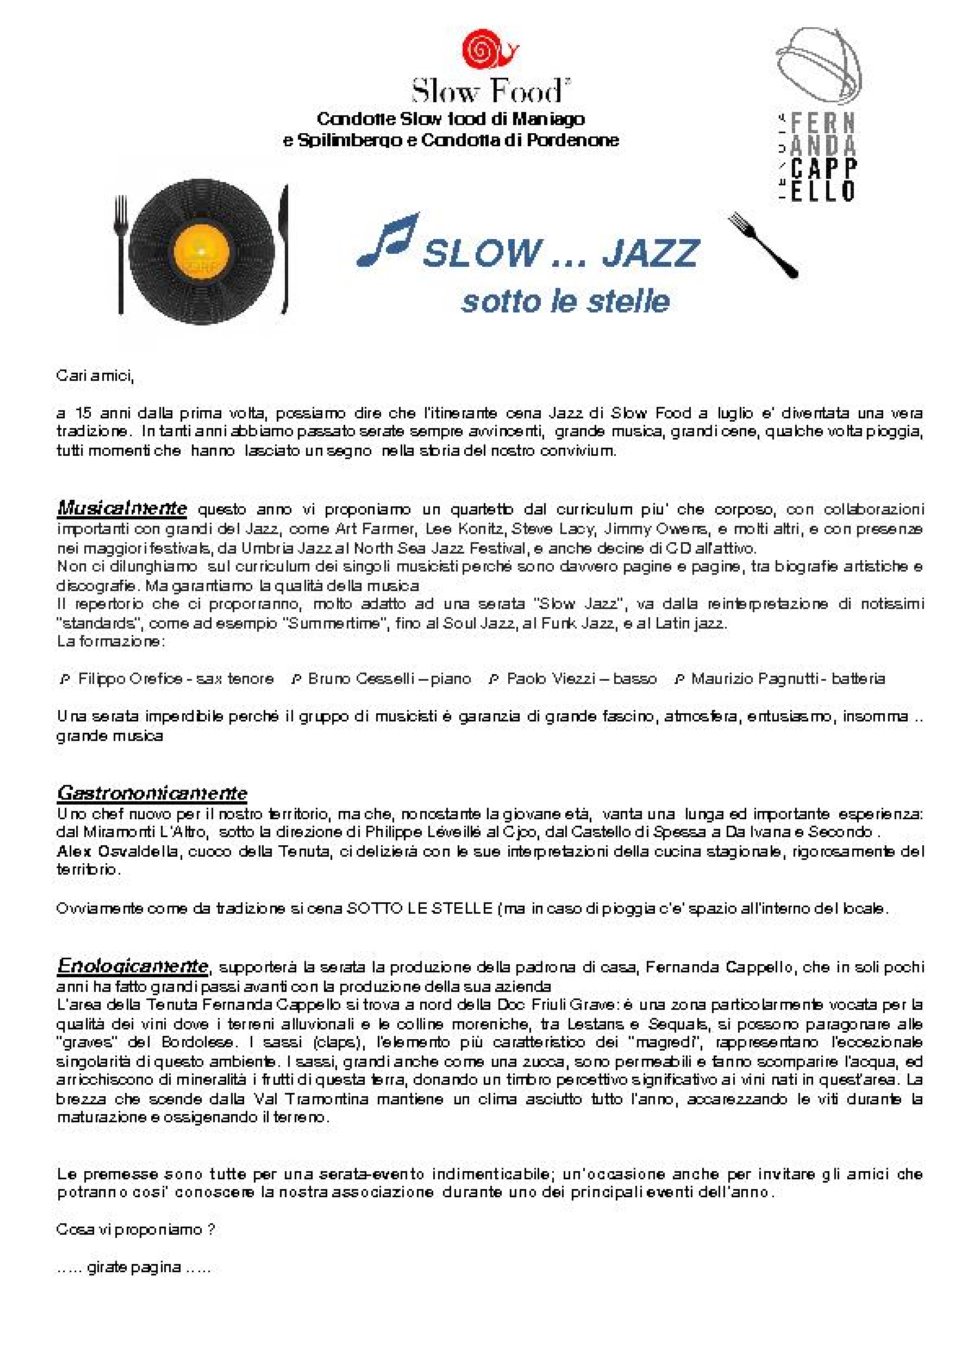 SLOW JAZZ SOTTO LE STELLE